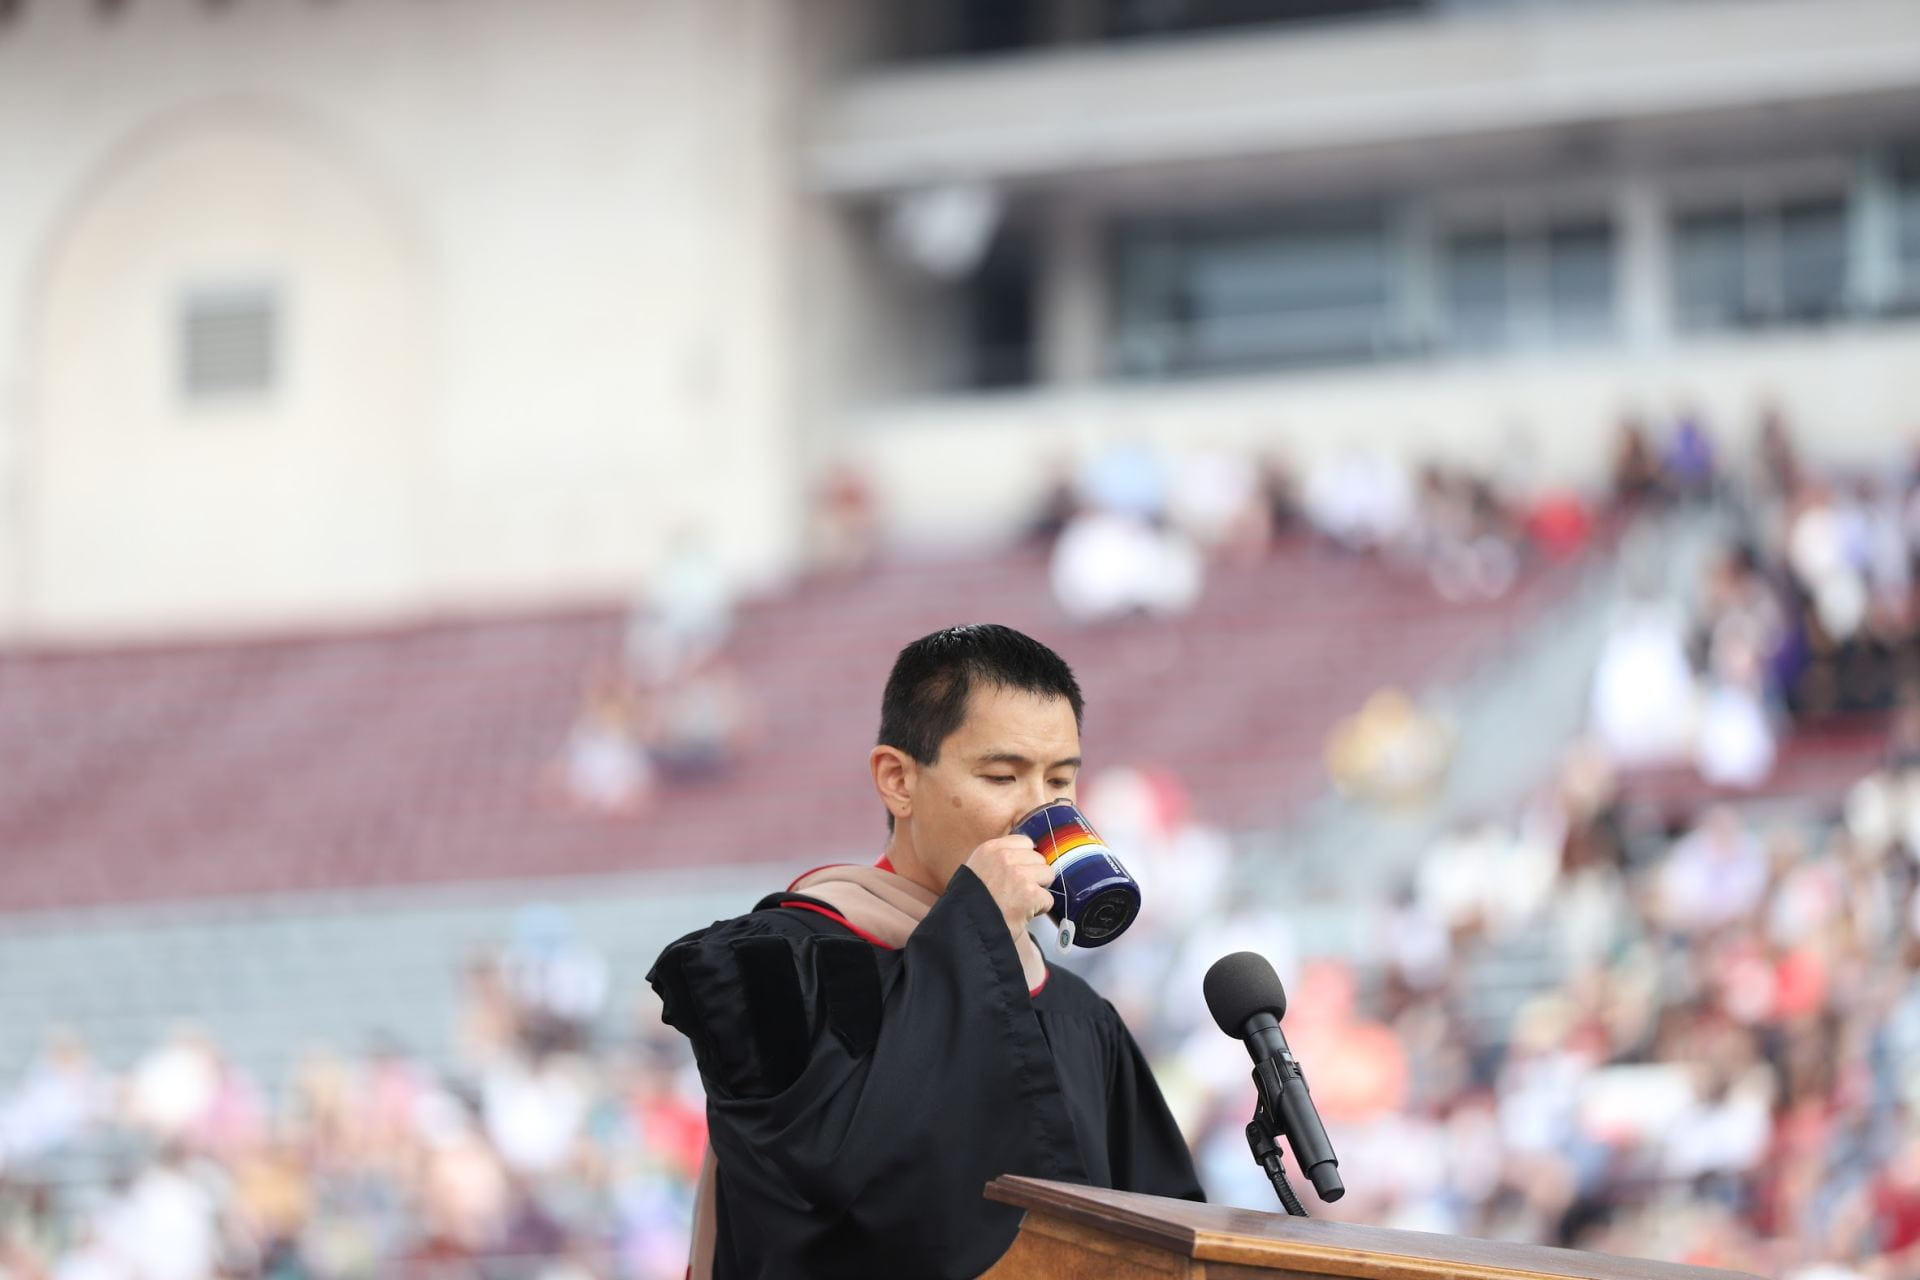 From Christopher Pan's commencement speech. Credit: Sebastian Petrou Griffith